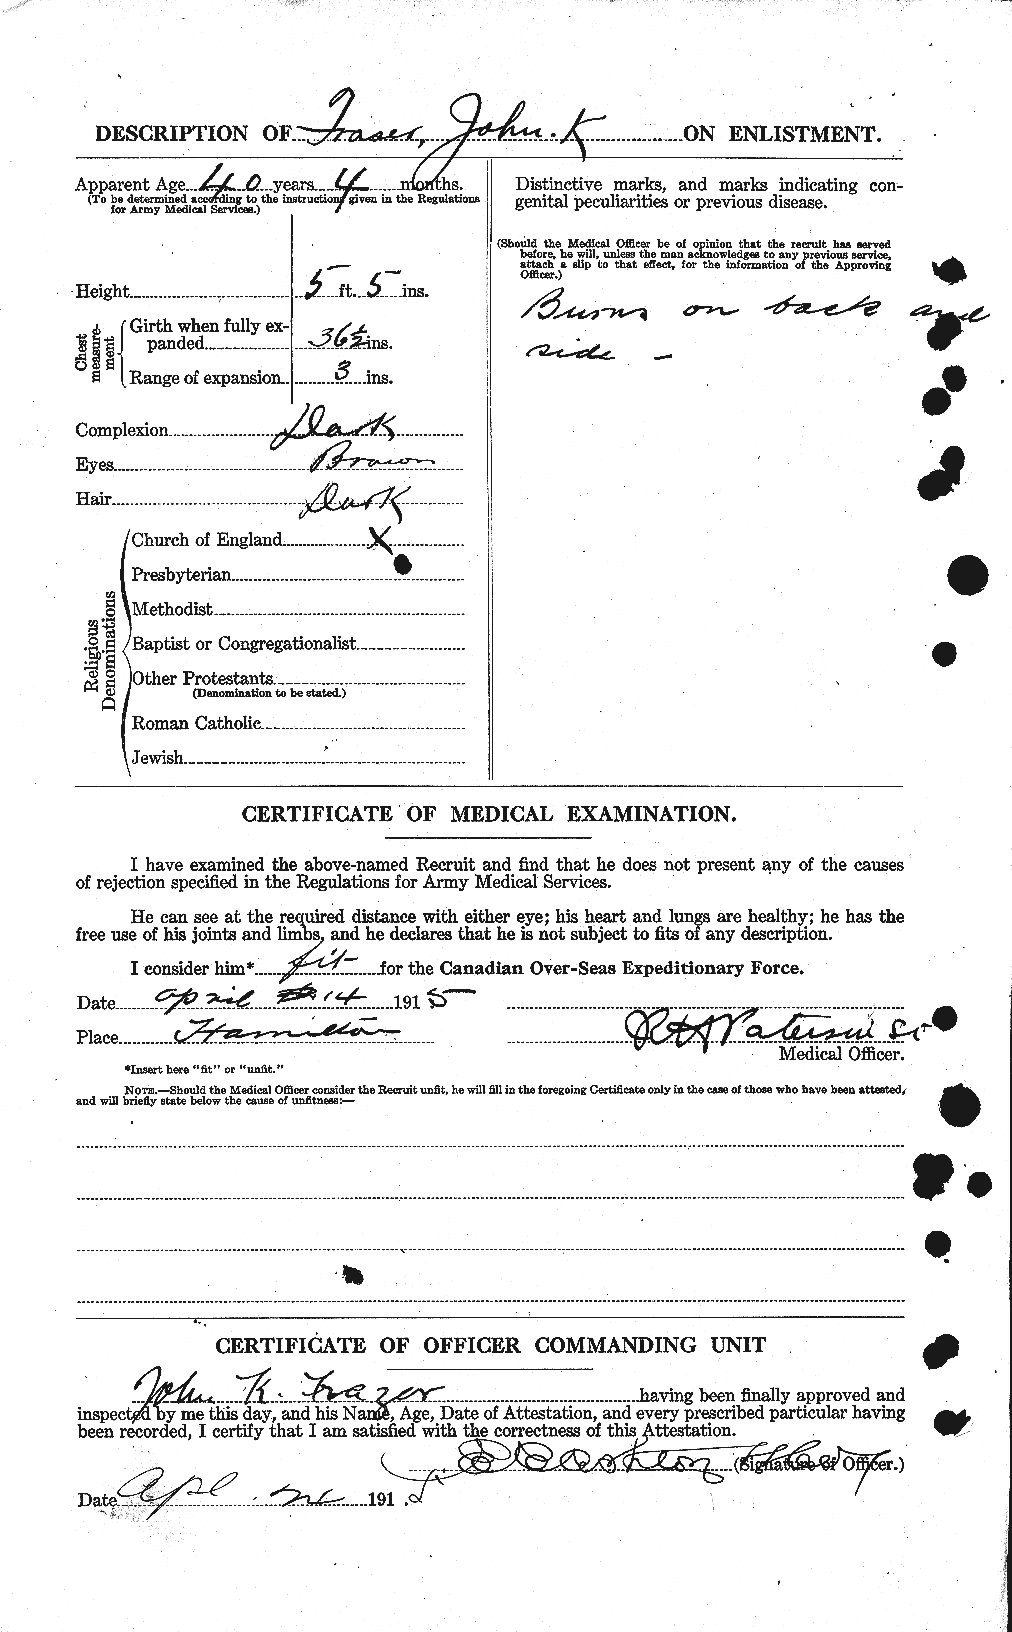 Personnel Records of the First World War - CEF 334146b